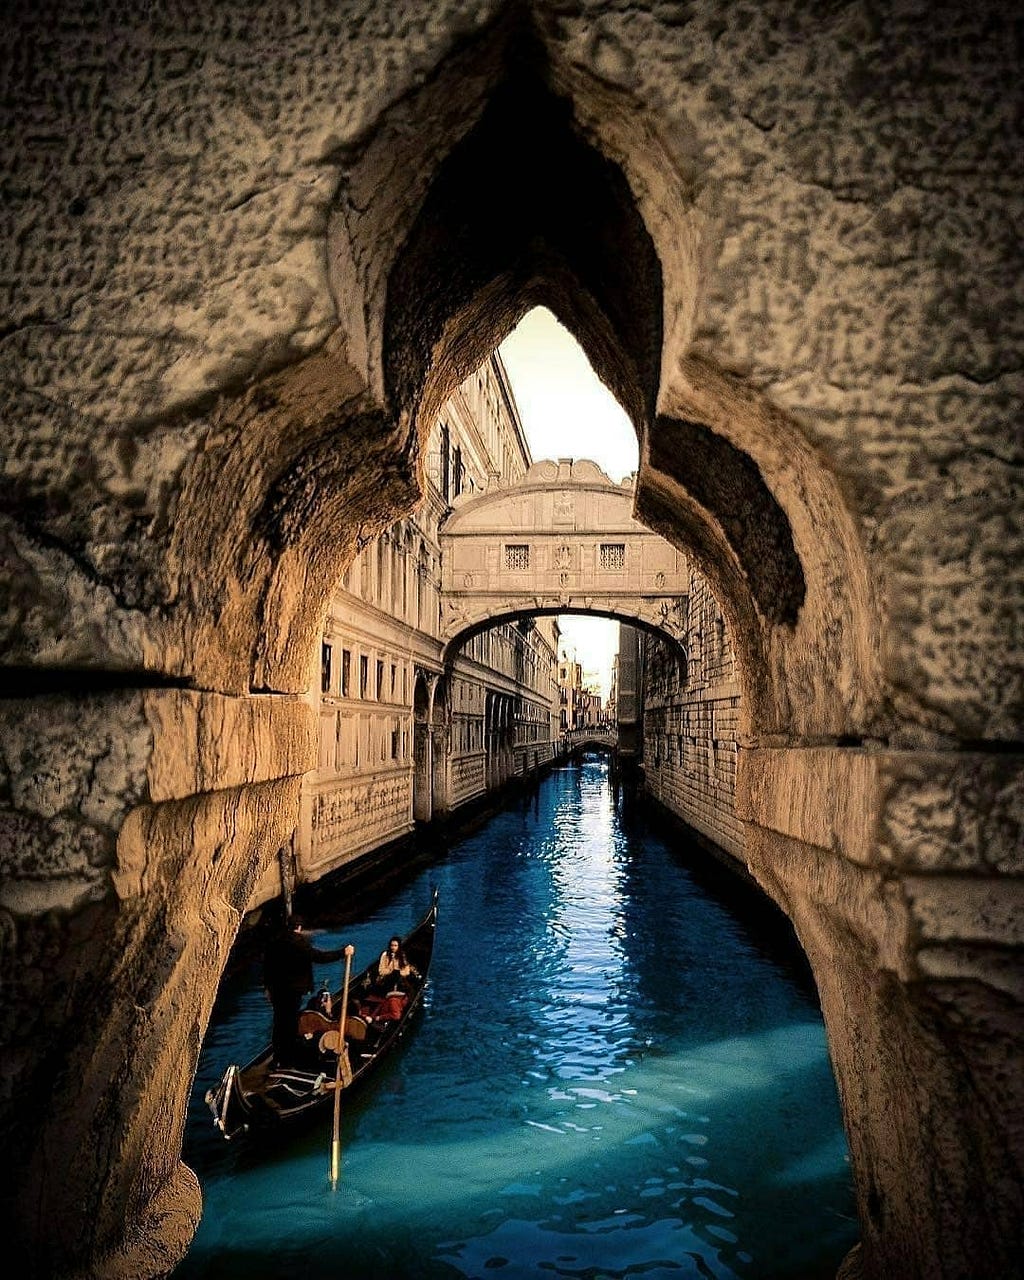 The view through an archway in one of the canals in Venice. The stone archway is old and weathered. The water is a deep navy blue; there is a boat with a couple in the lower foreground being rowed in a small boat.